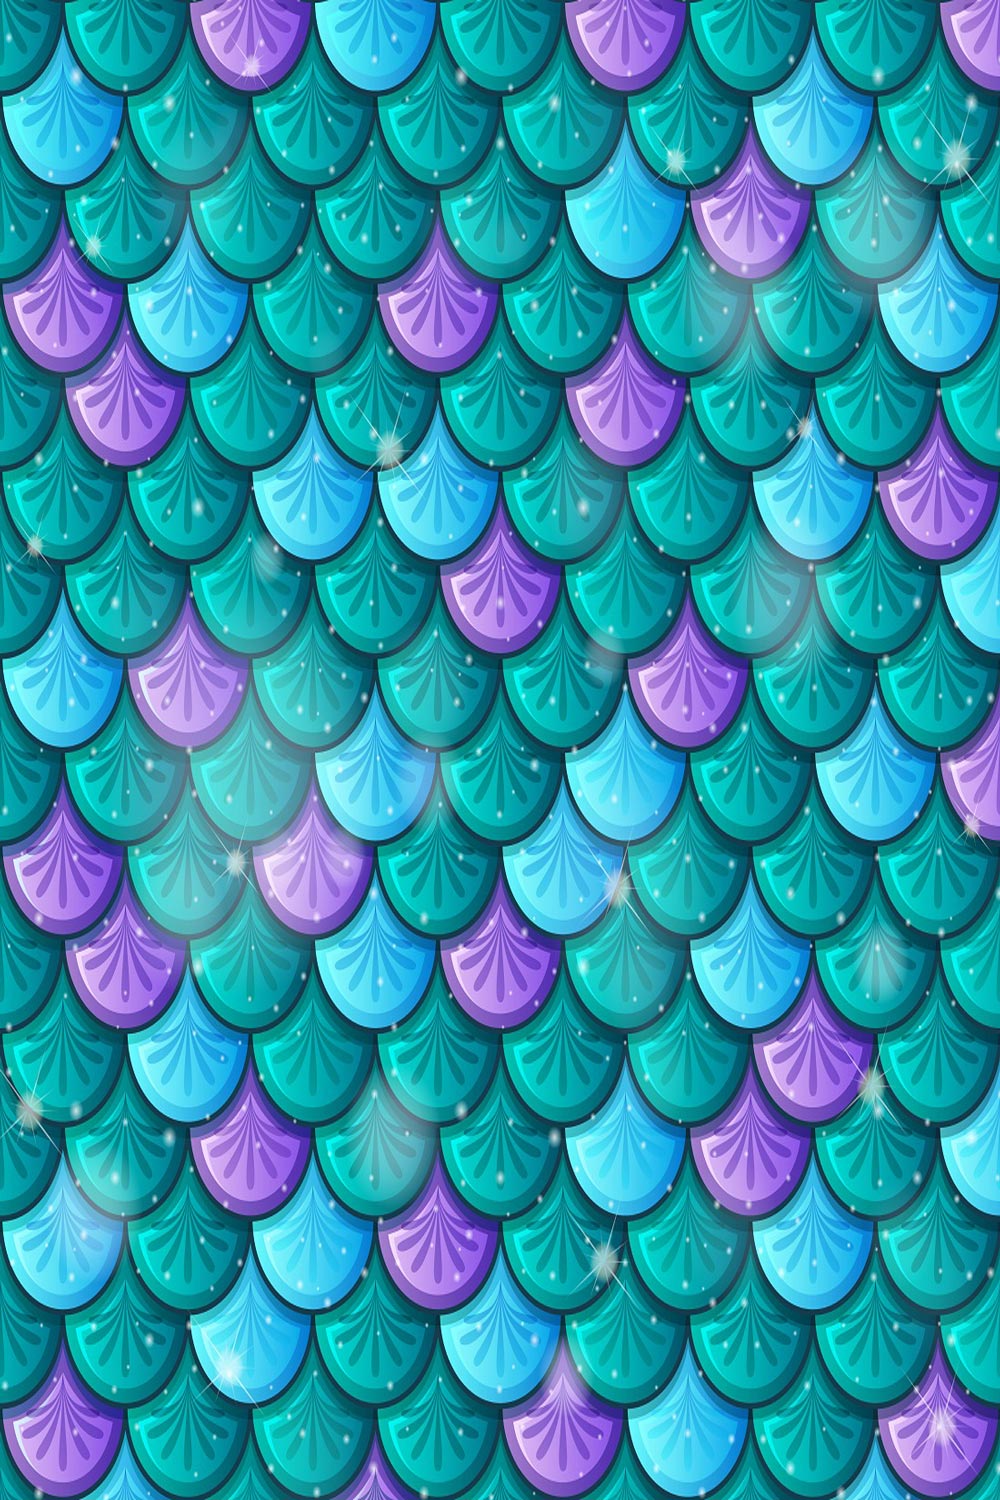 Fish scale seamless pattern background pinterest preview image.